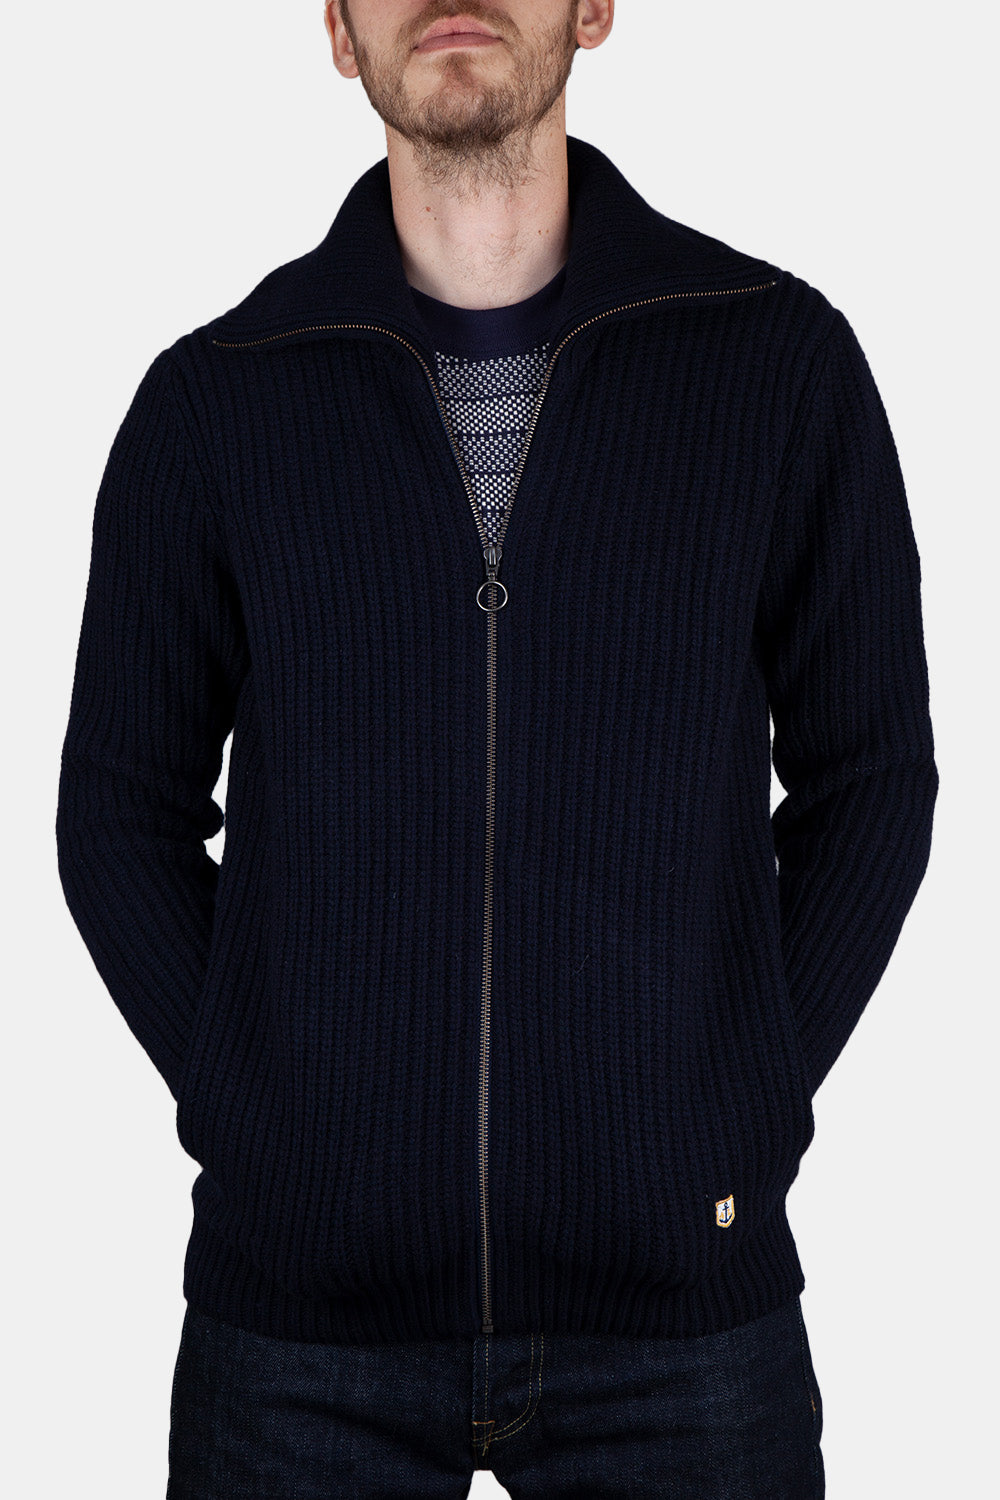 Armor Lux 2x2 Ribbed Zipped Knit (Navy) | Number Six